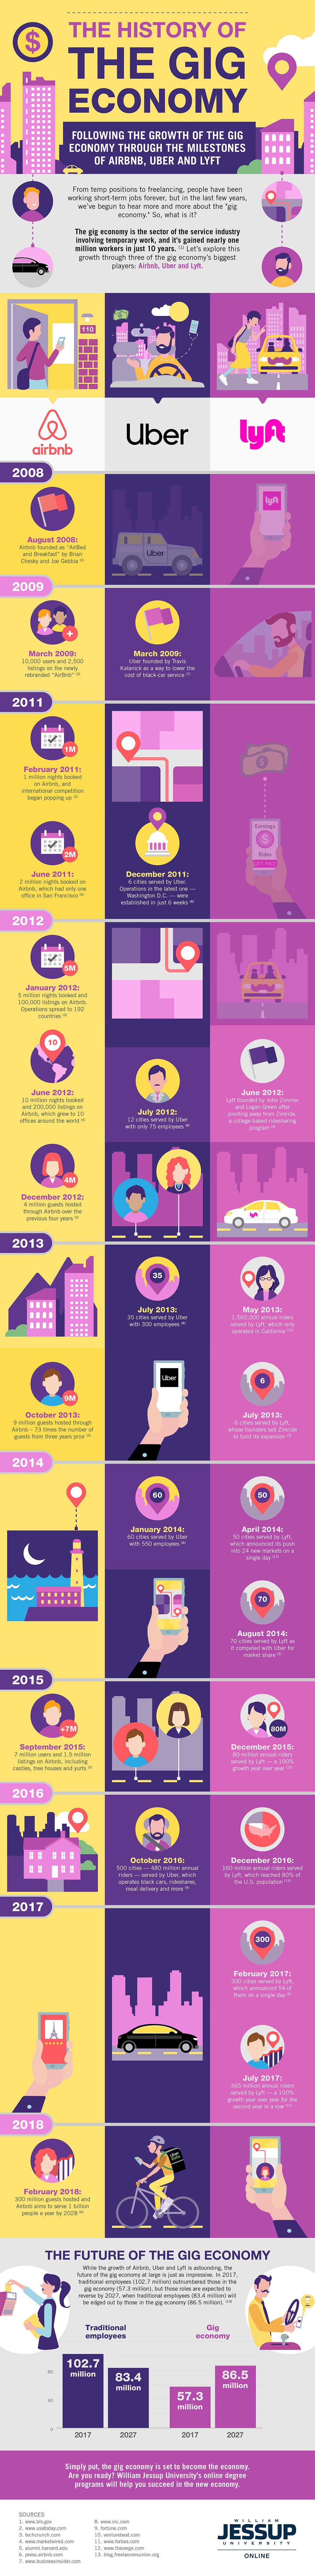 The Gig Economy: Past, Present, and Future #infographic